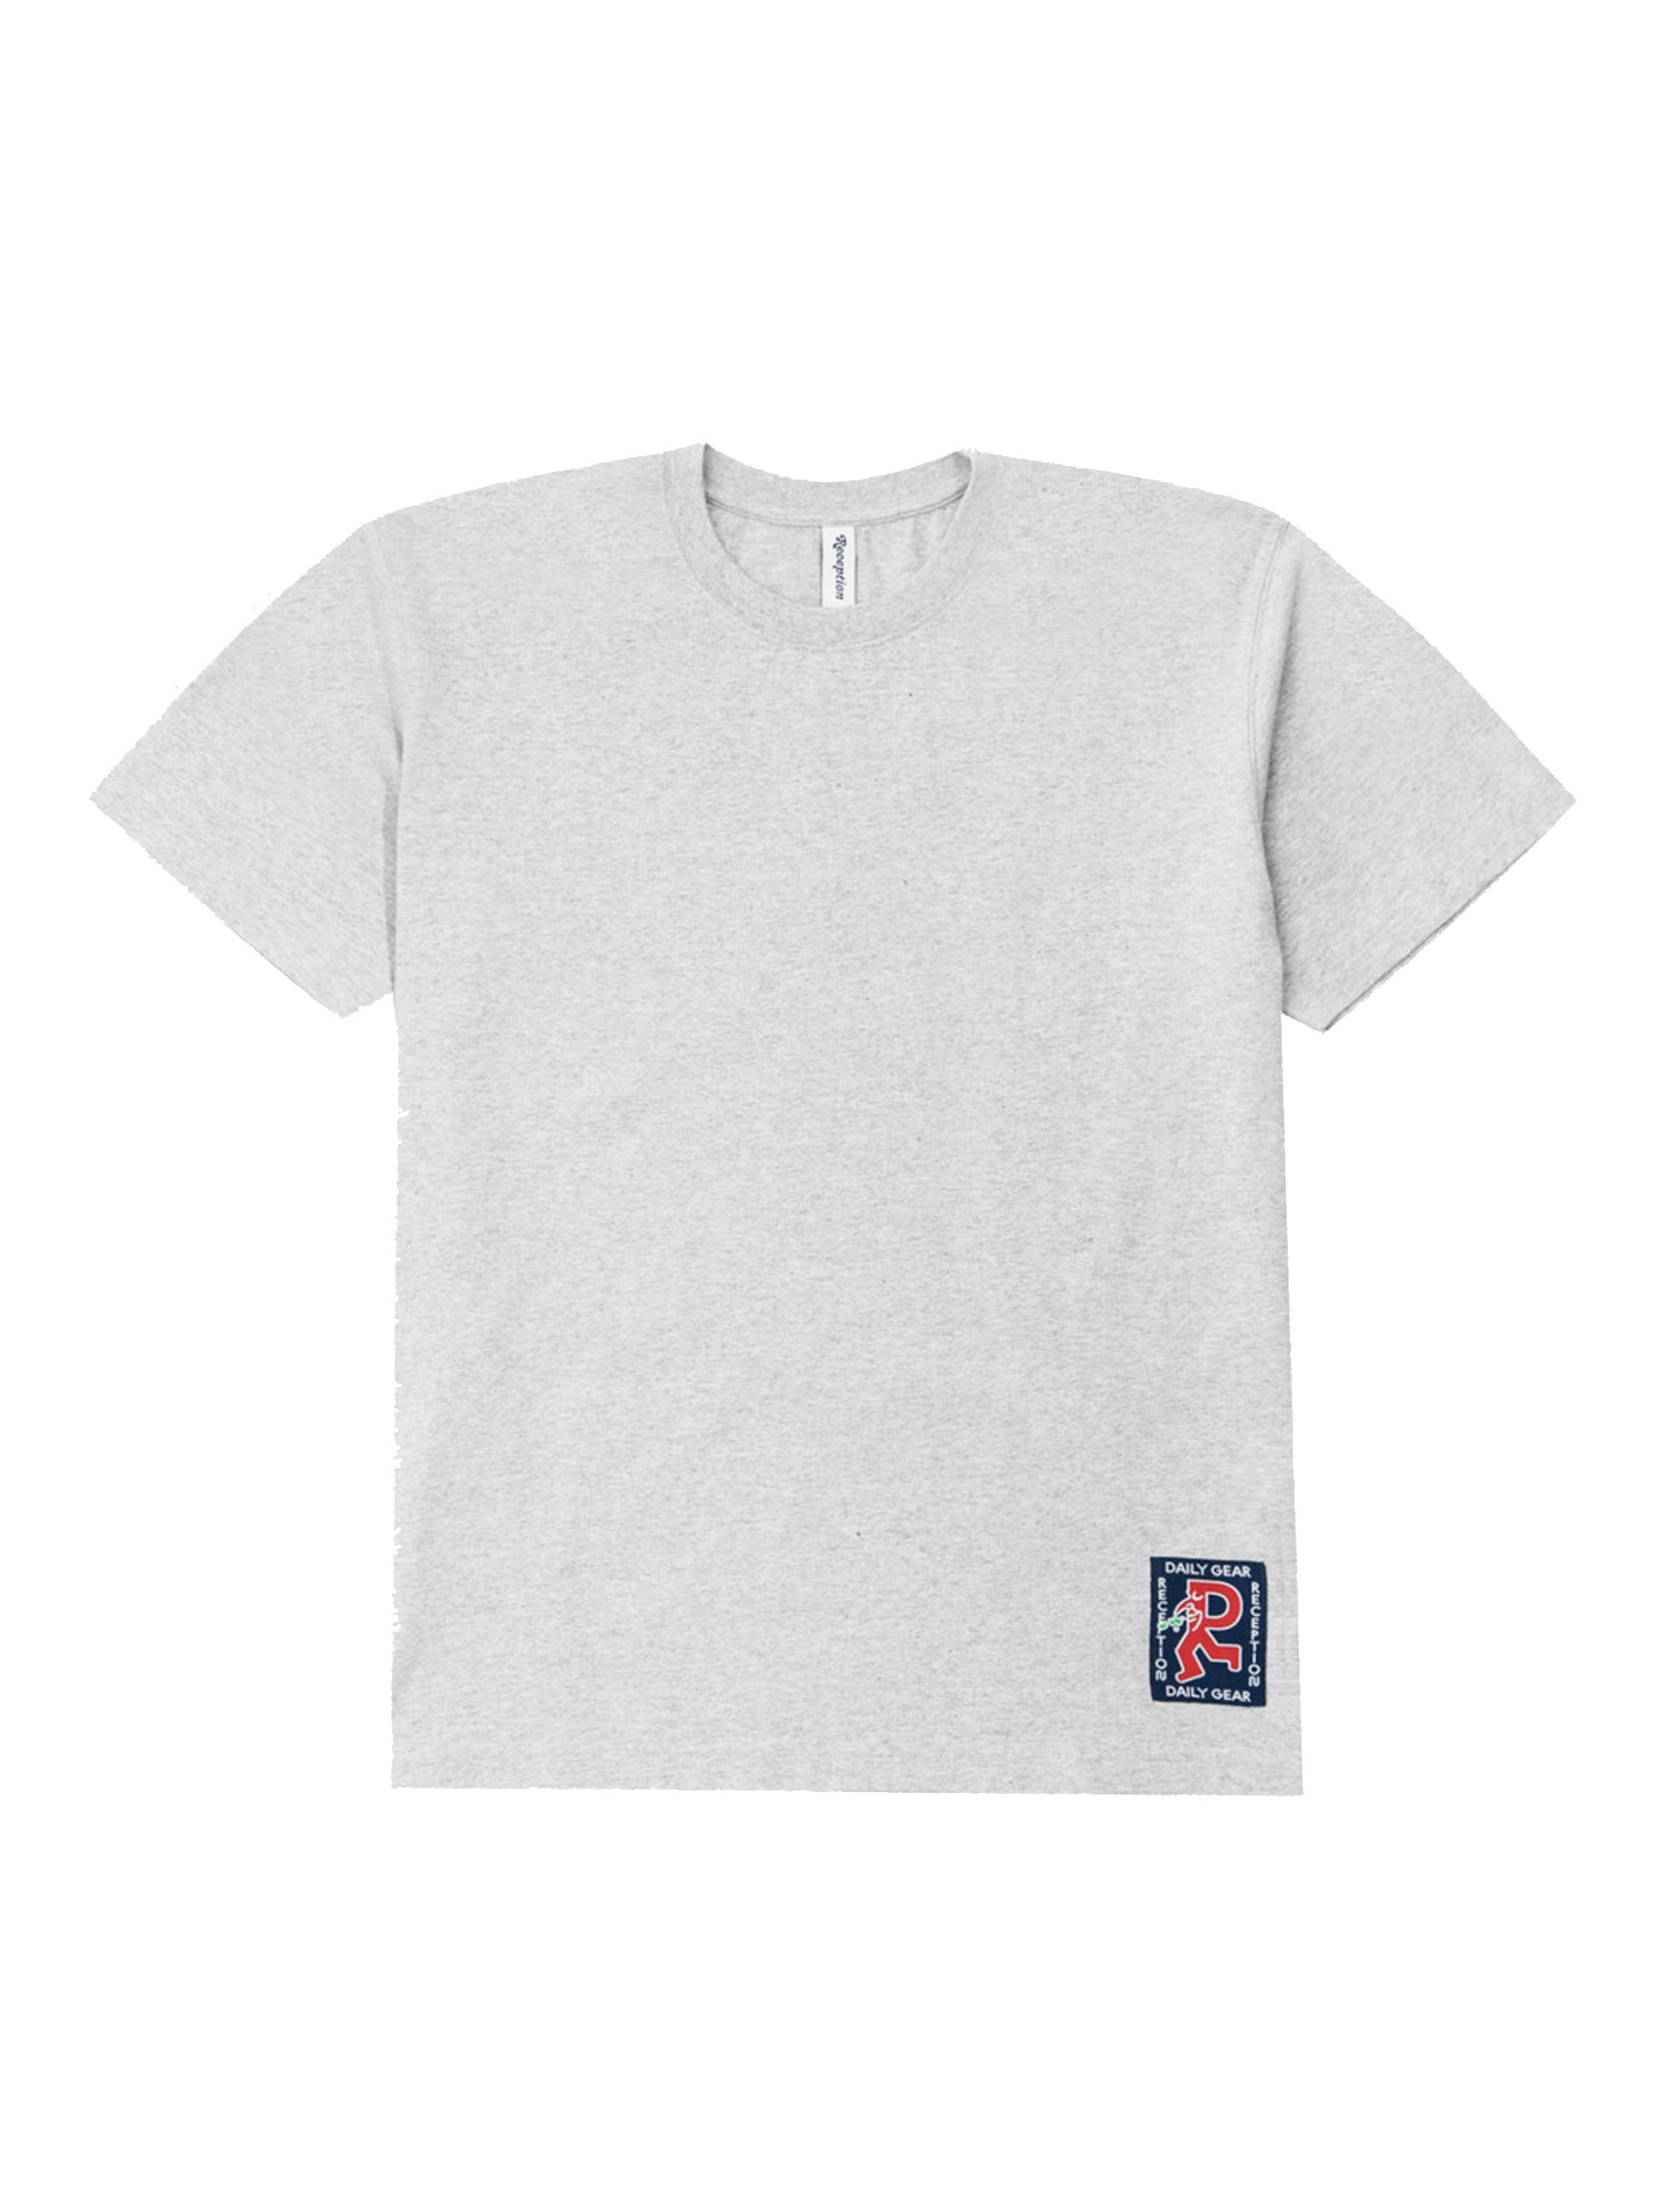 RECEPTION CLOTHING SS TEE ICON C COTTON SINGLE JERSEY